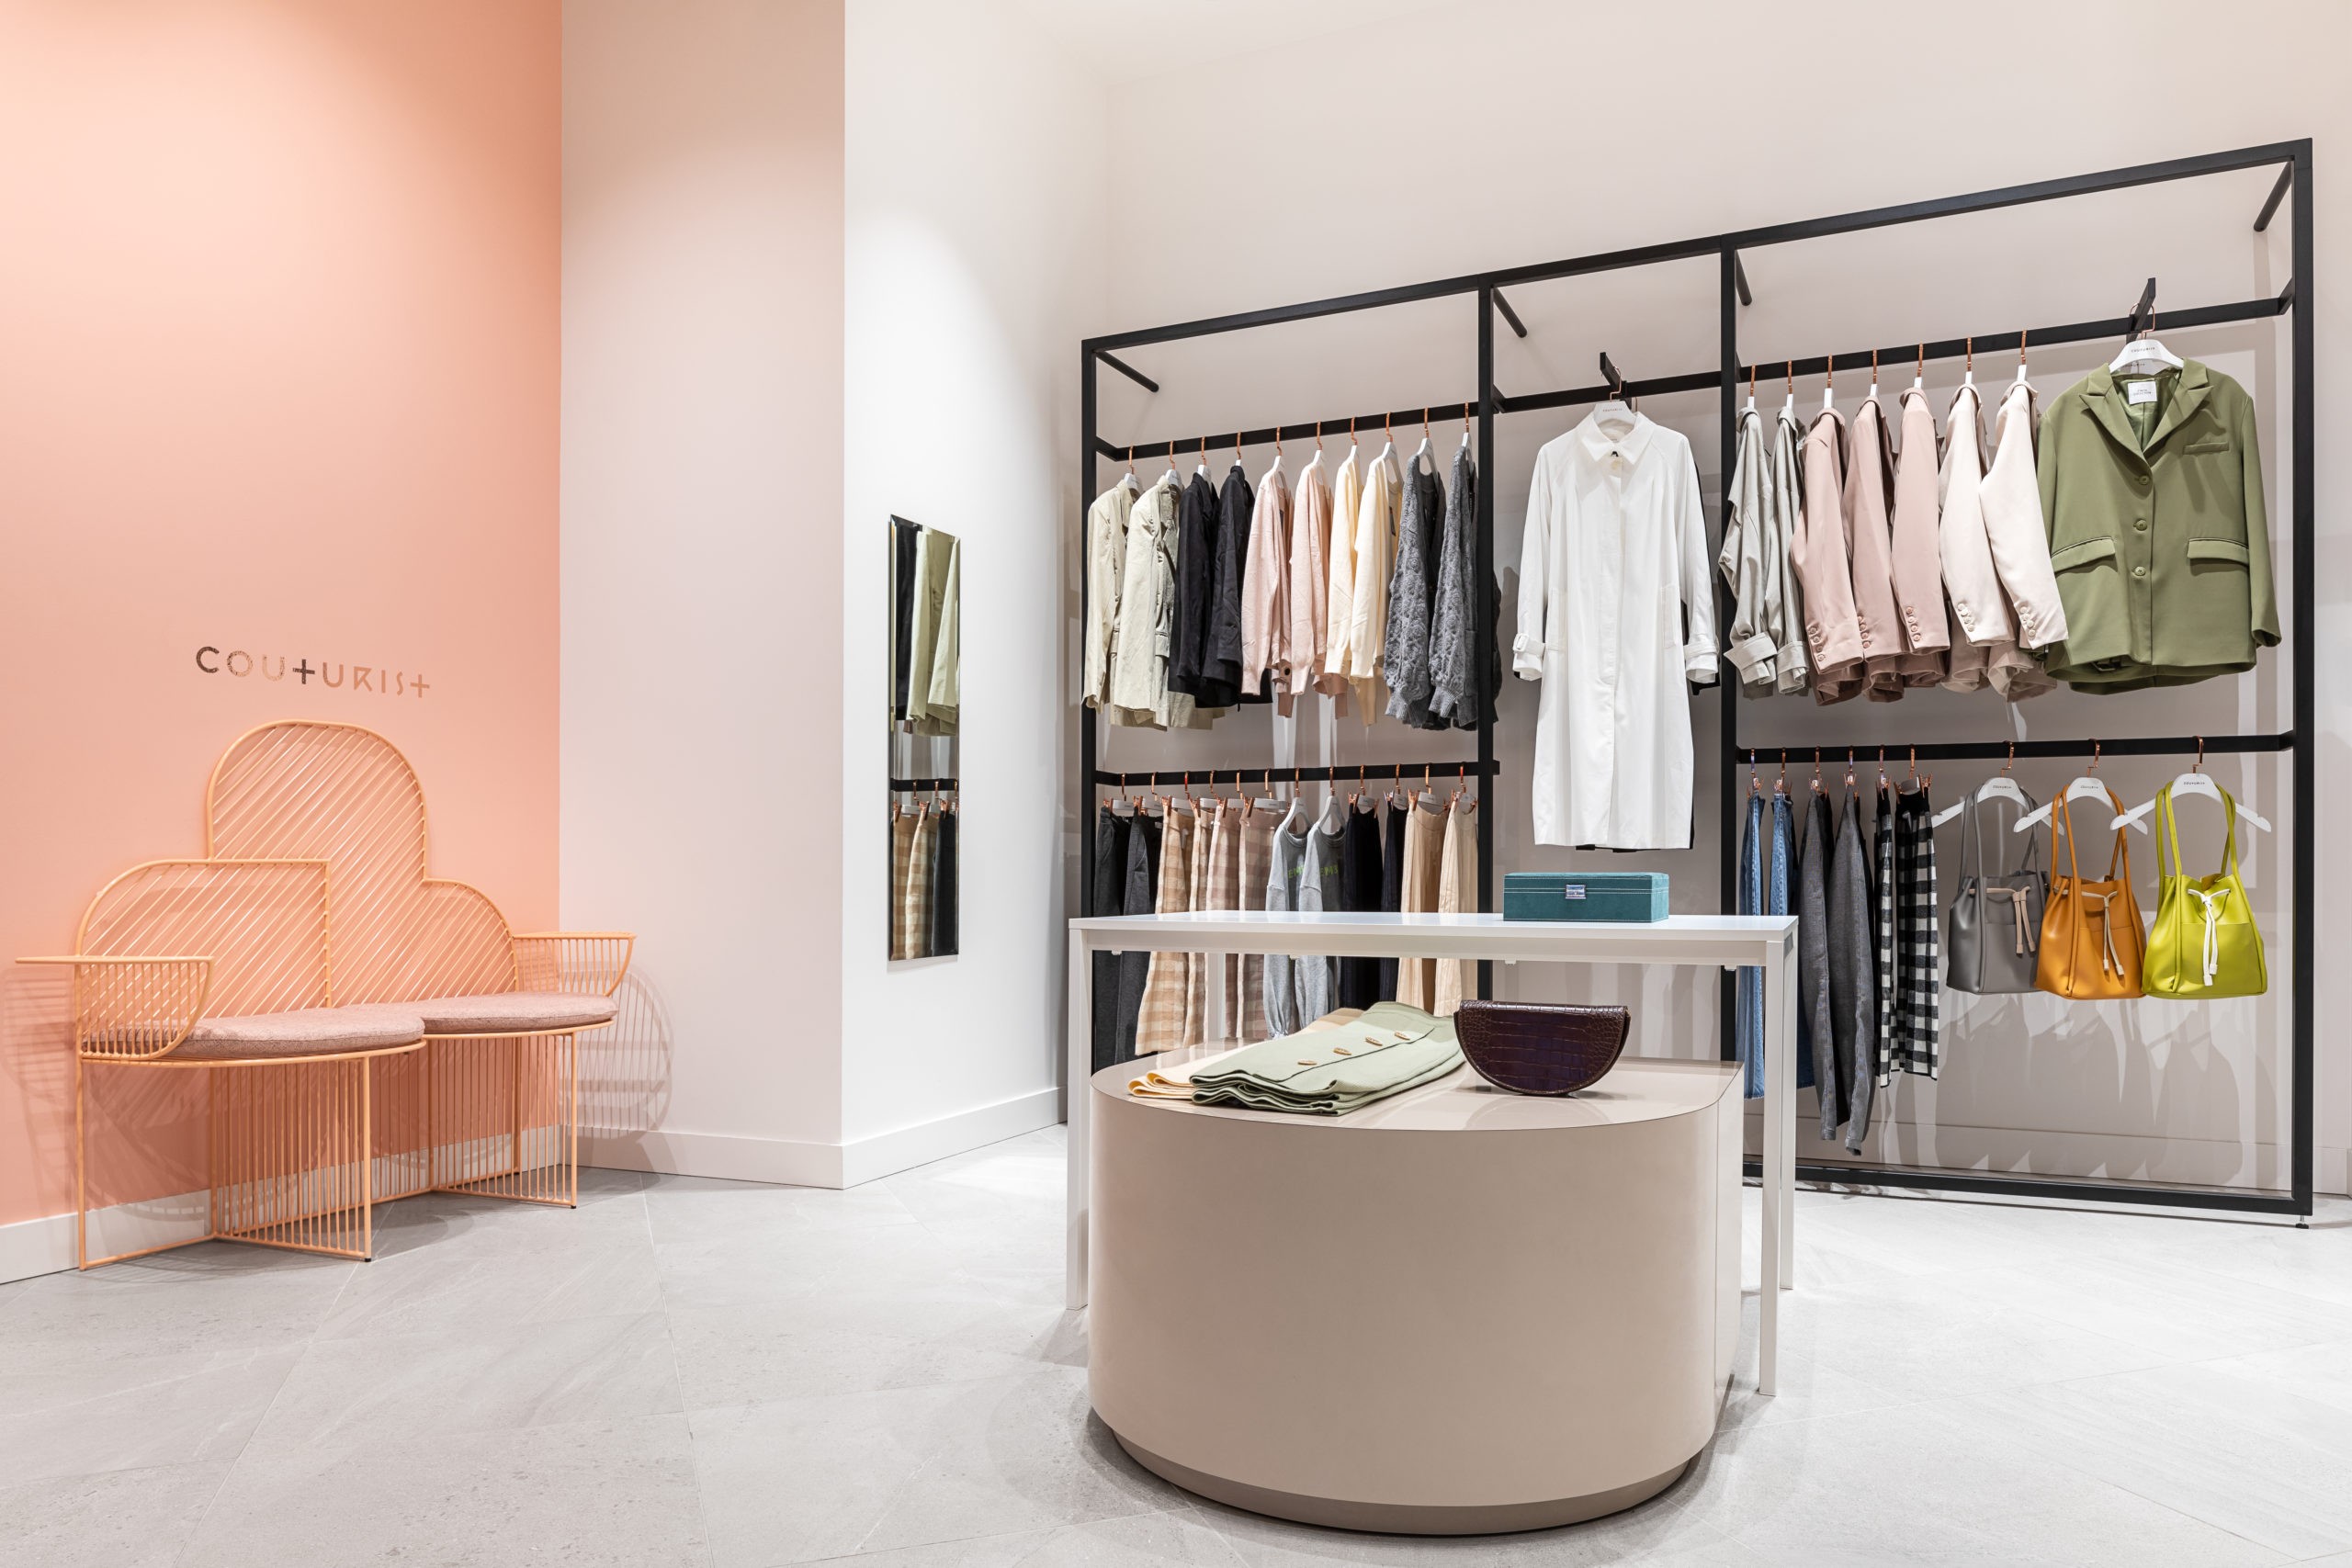 Couturist Retail & Showroom Interior Design in Burnaby  BC Canada , by Cutler